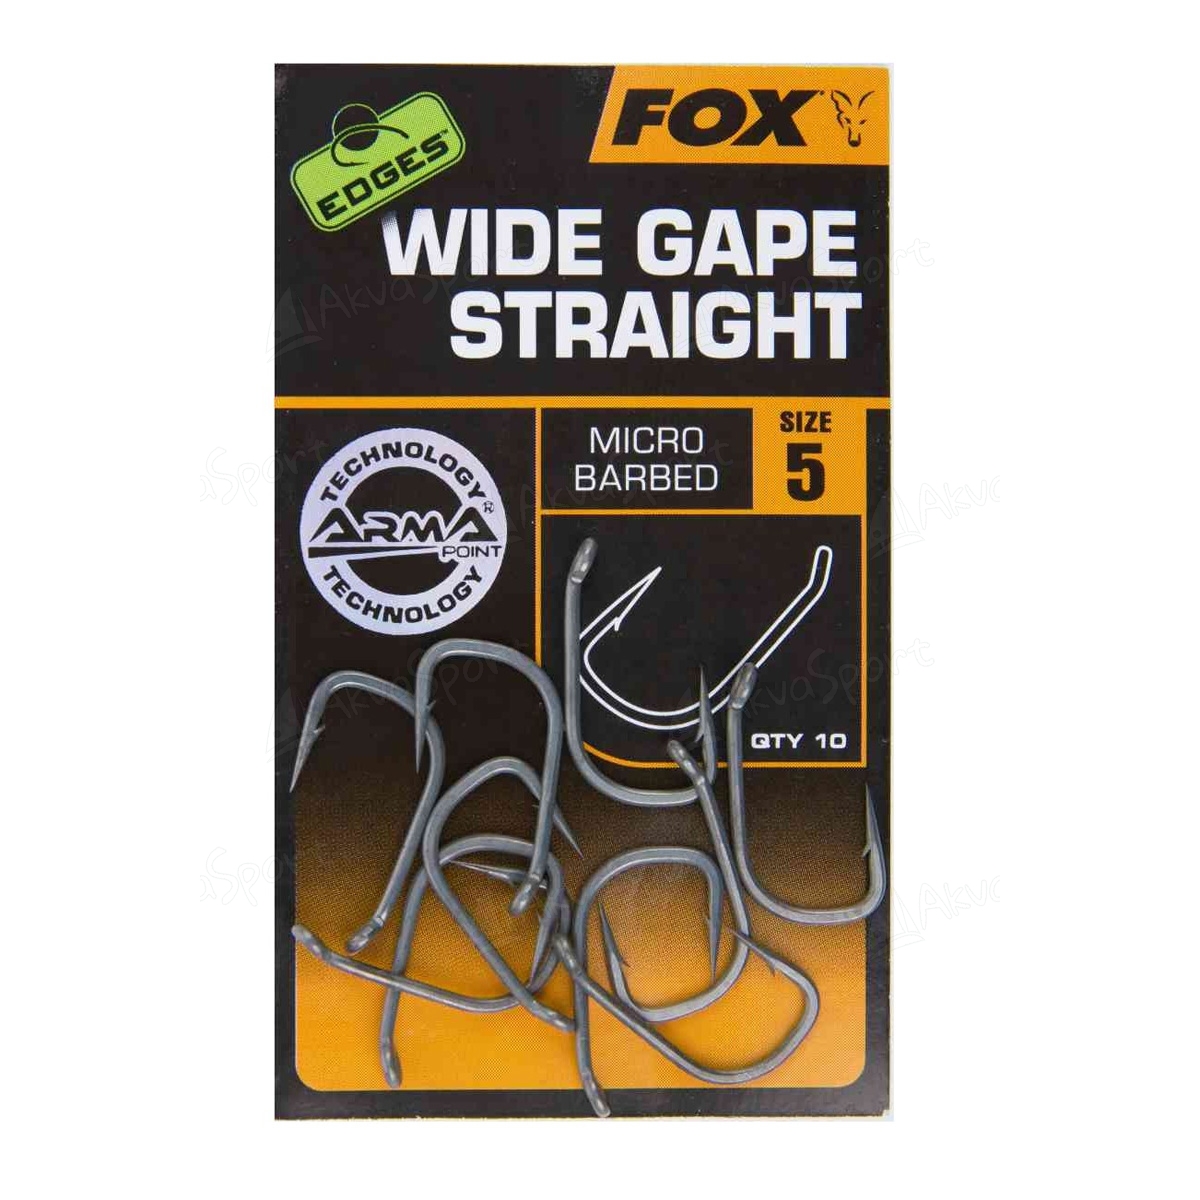 Fox Edges Armapoint Super Wide Gape Out-Turned Eye Hooks - Fishing Tackle  Warehouse